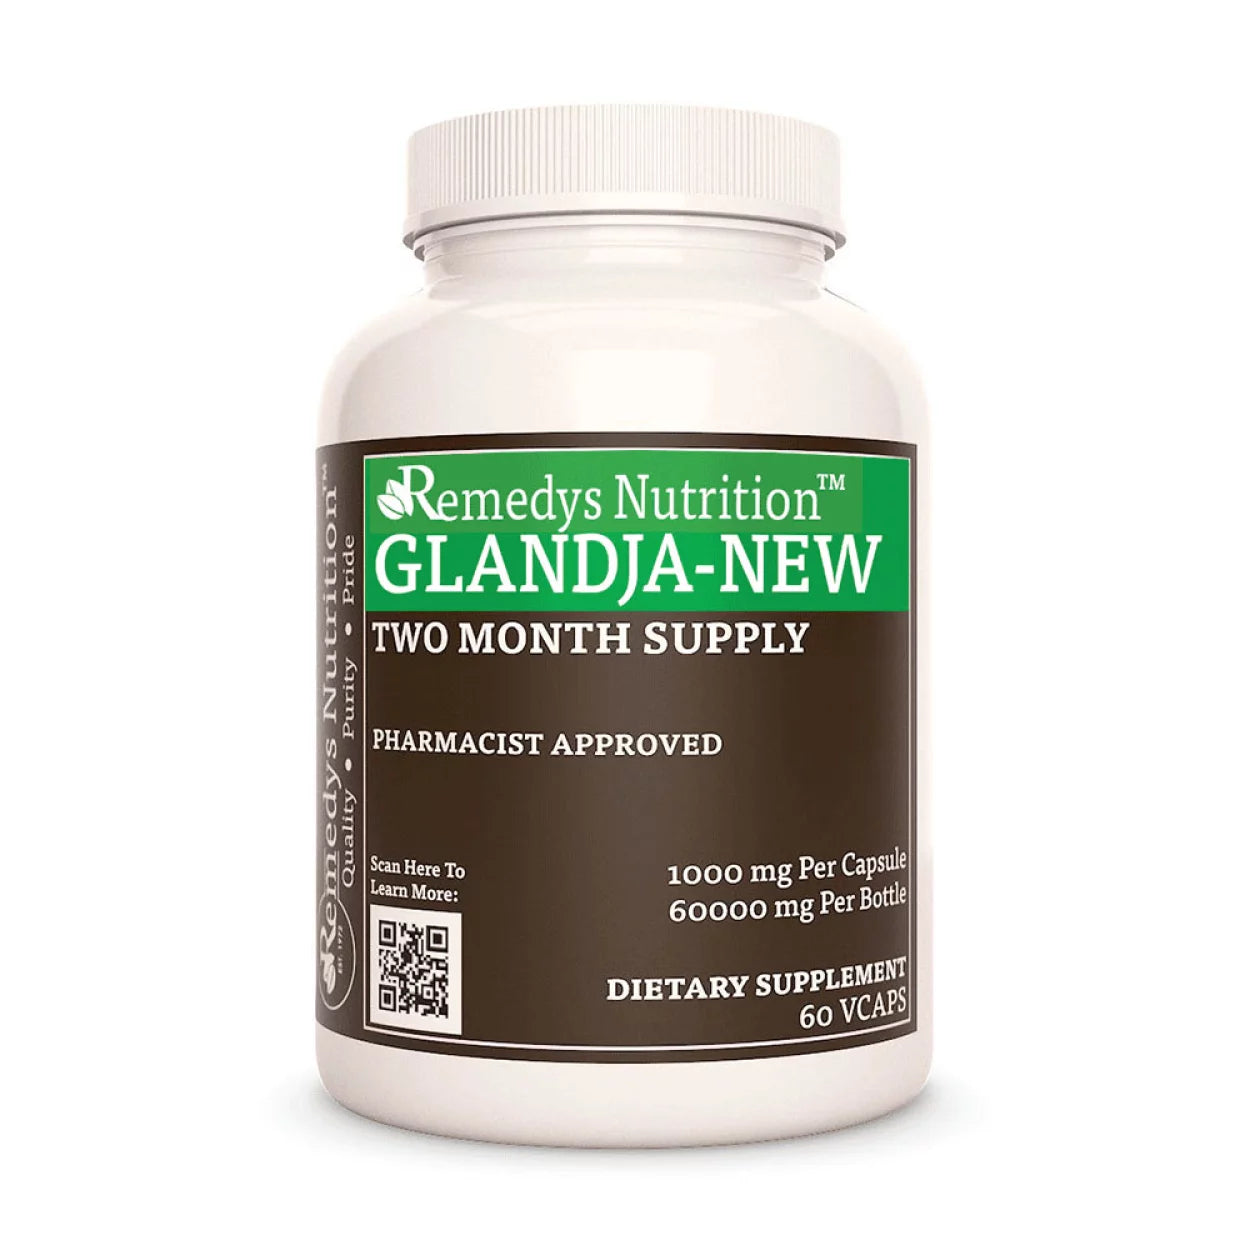 Image of Remedy's Nutrition® GlandJa-New™ Capsules Dietary Supplement front bottle. Made in USA. Chamomile, Astragalus.